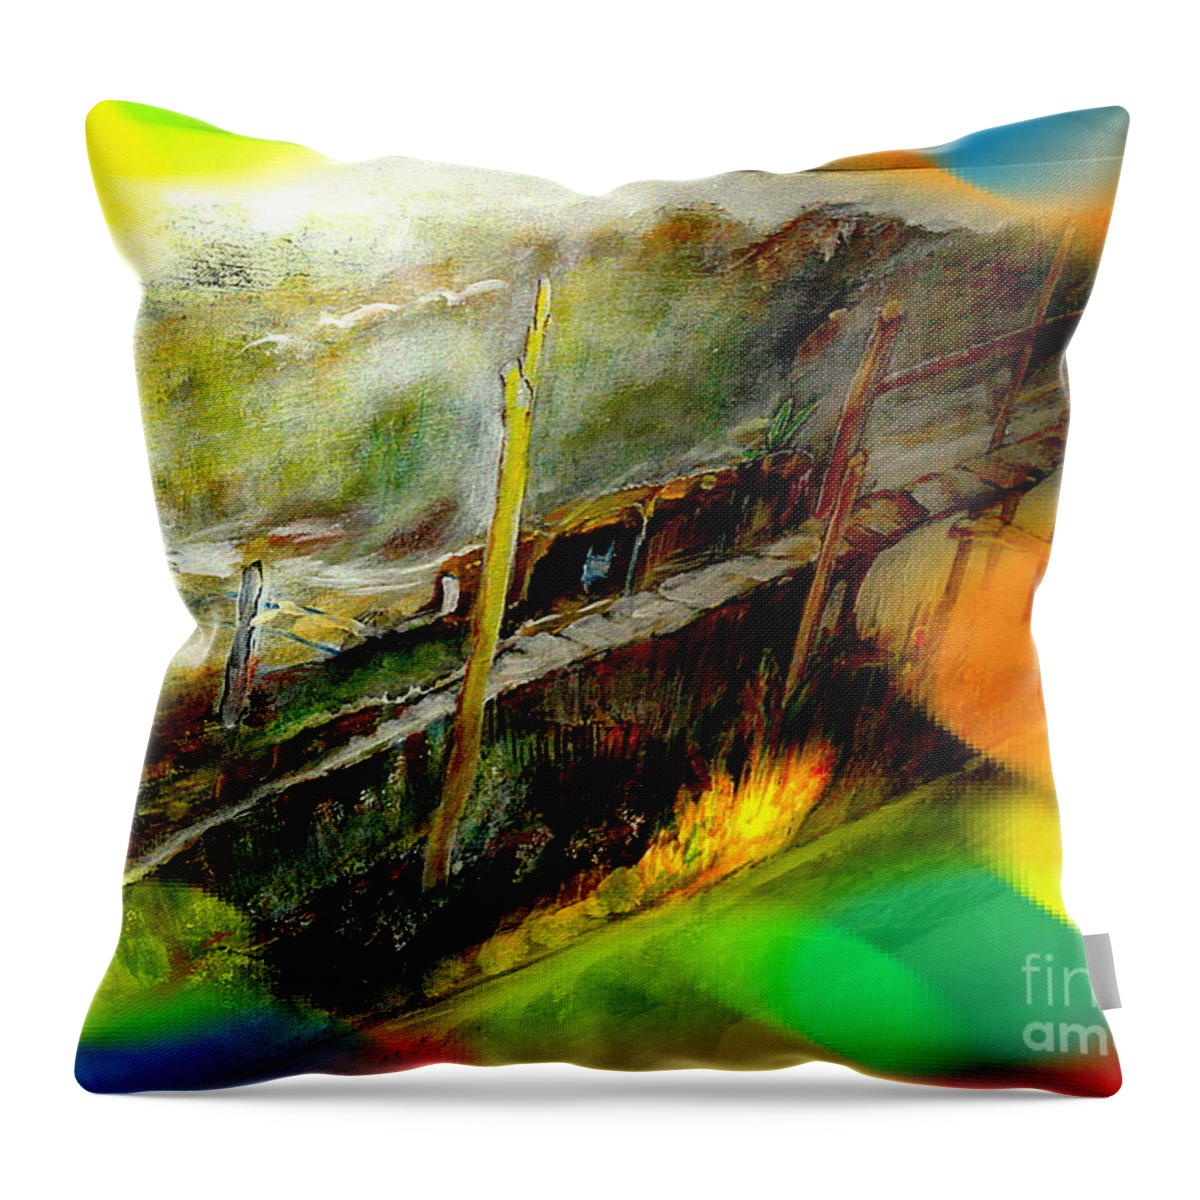 Abstract Throw Pillow featuring the painting Away Two by Subrata Bose